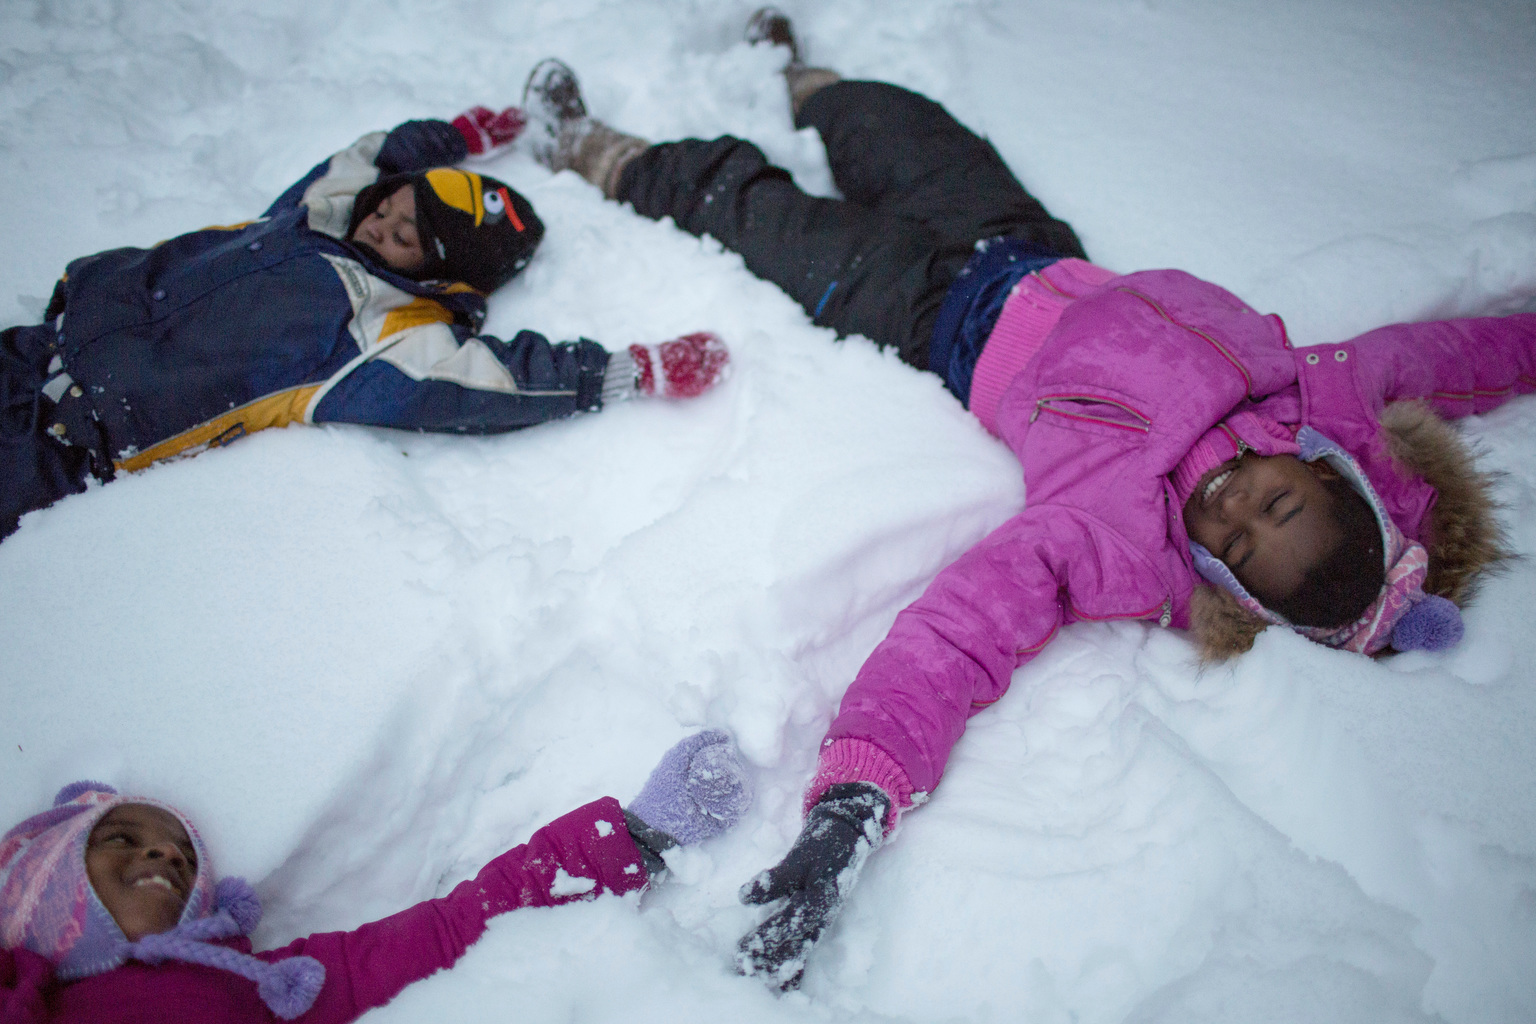 Children play in the snow in Canada.